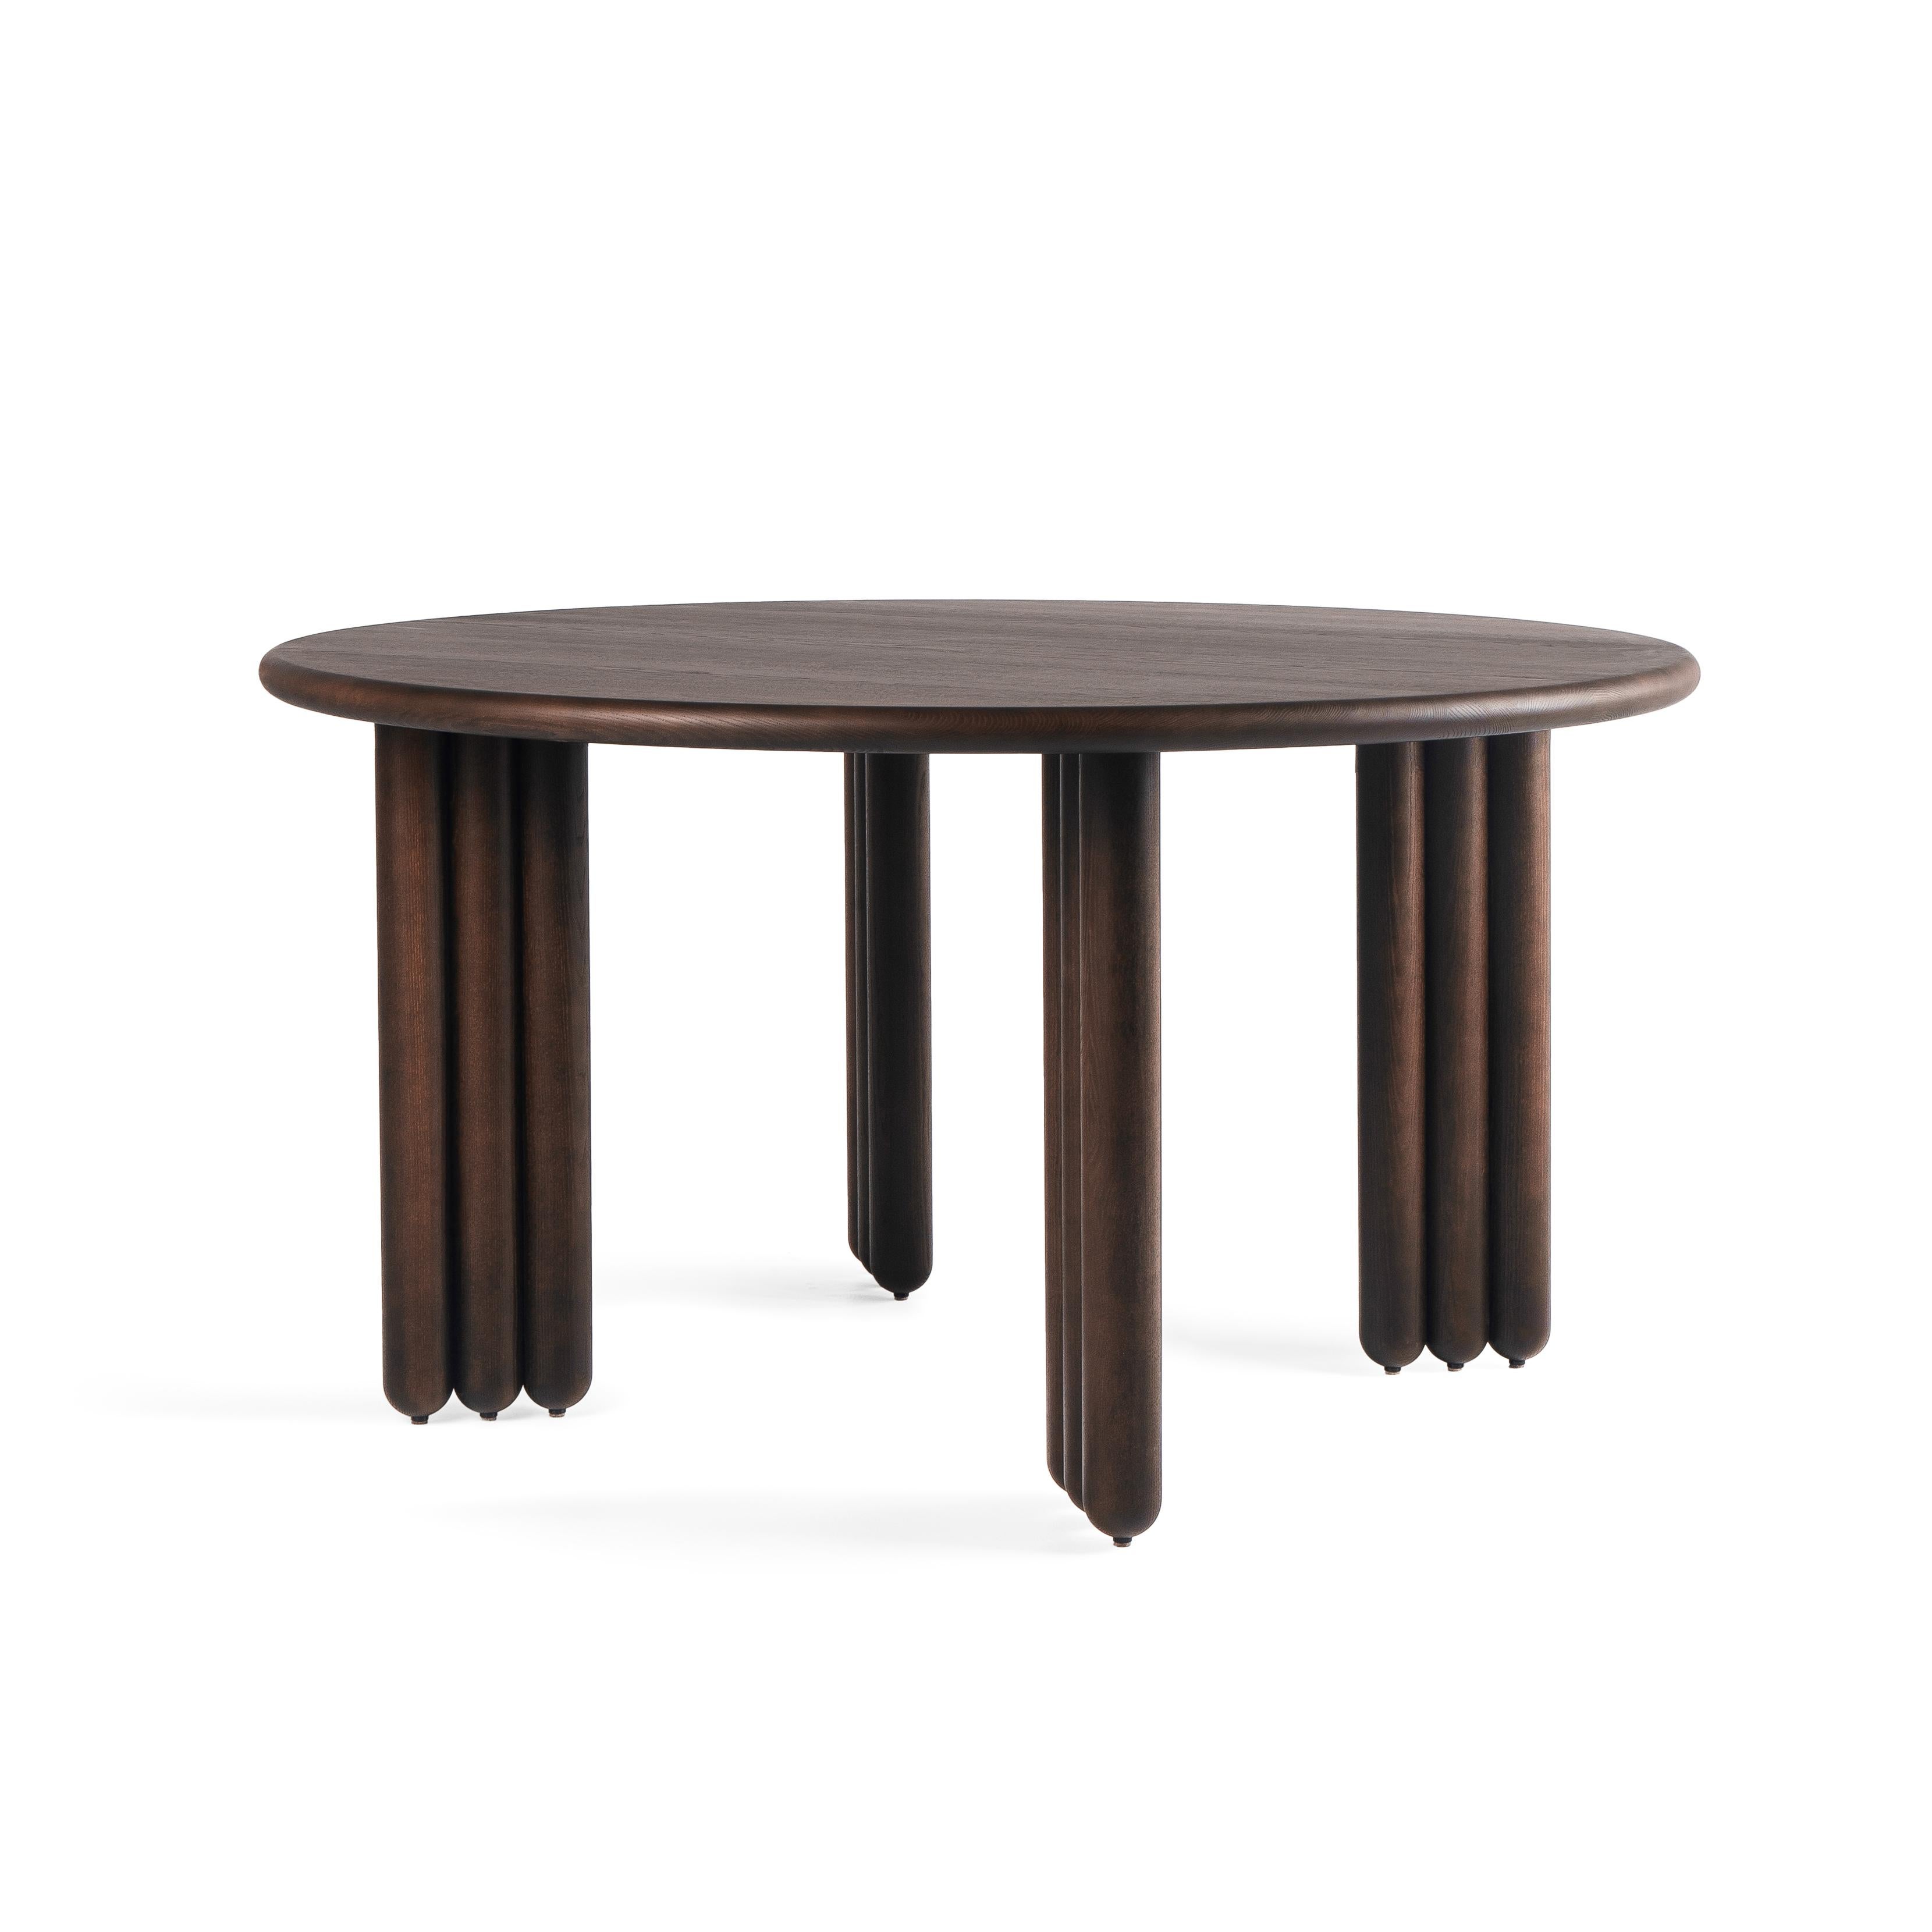 Ukrainian Contemporary Dining Round Table 'Flock' by Noom, 160 cm For Sale